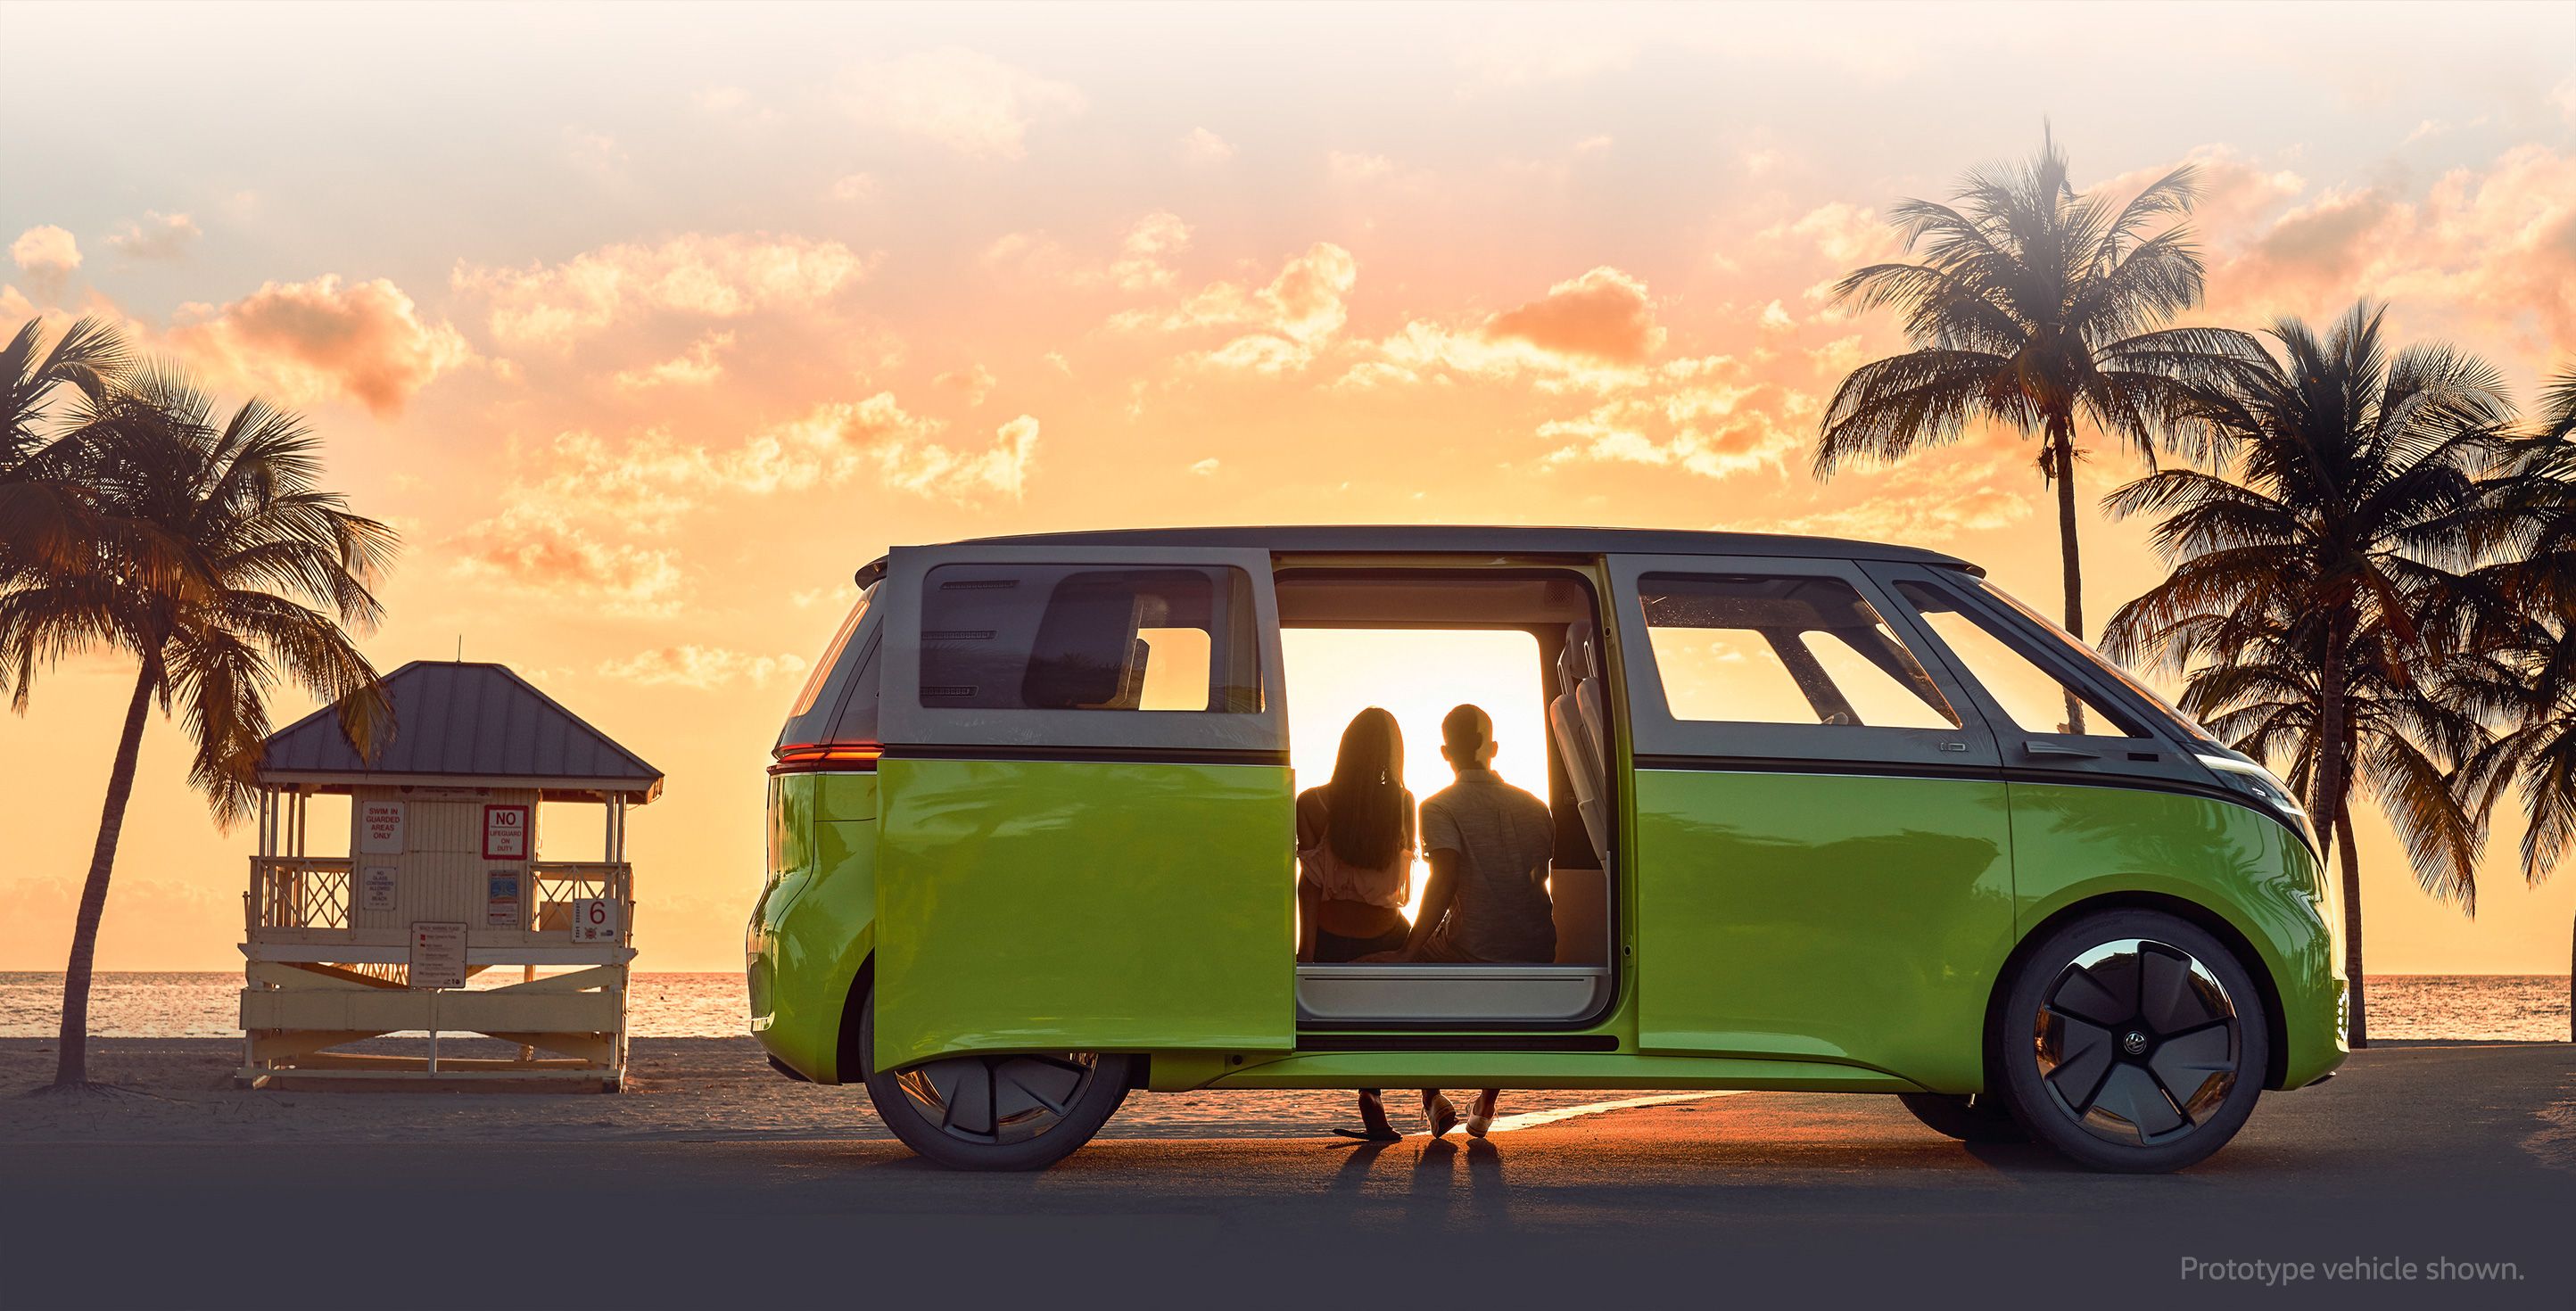 The I.D. Buzz on the beach, where all VW Busses should be.